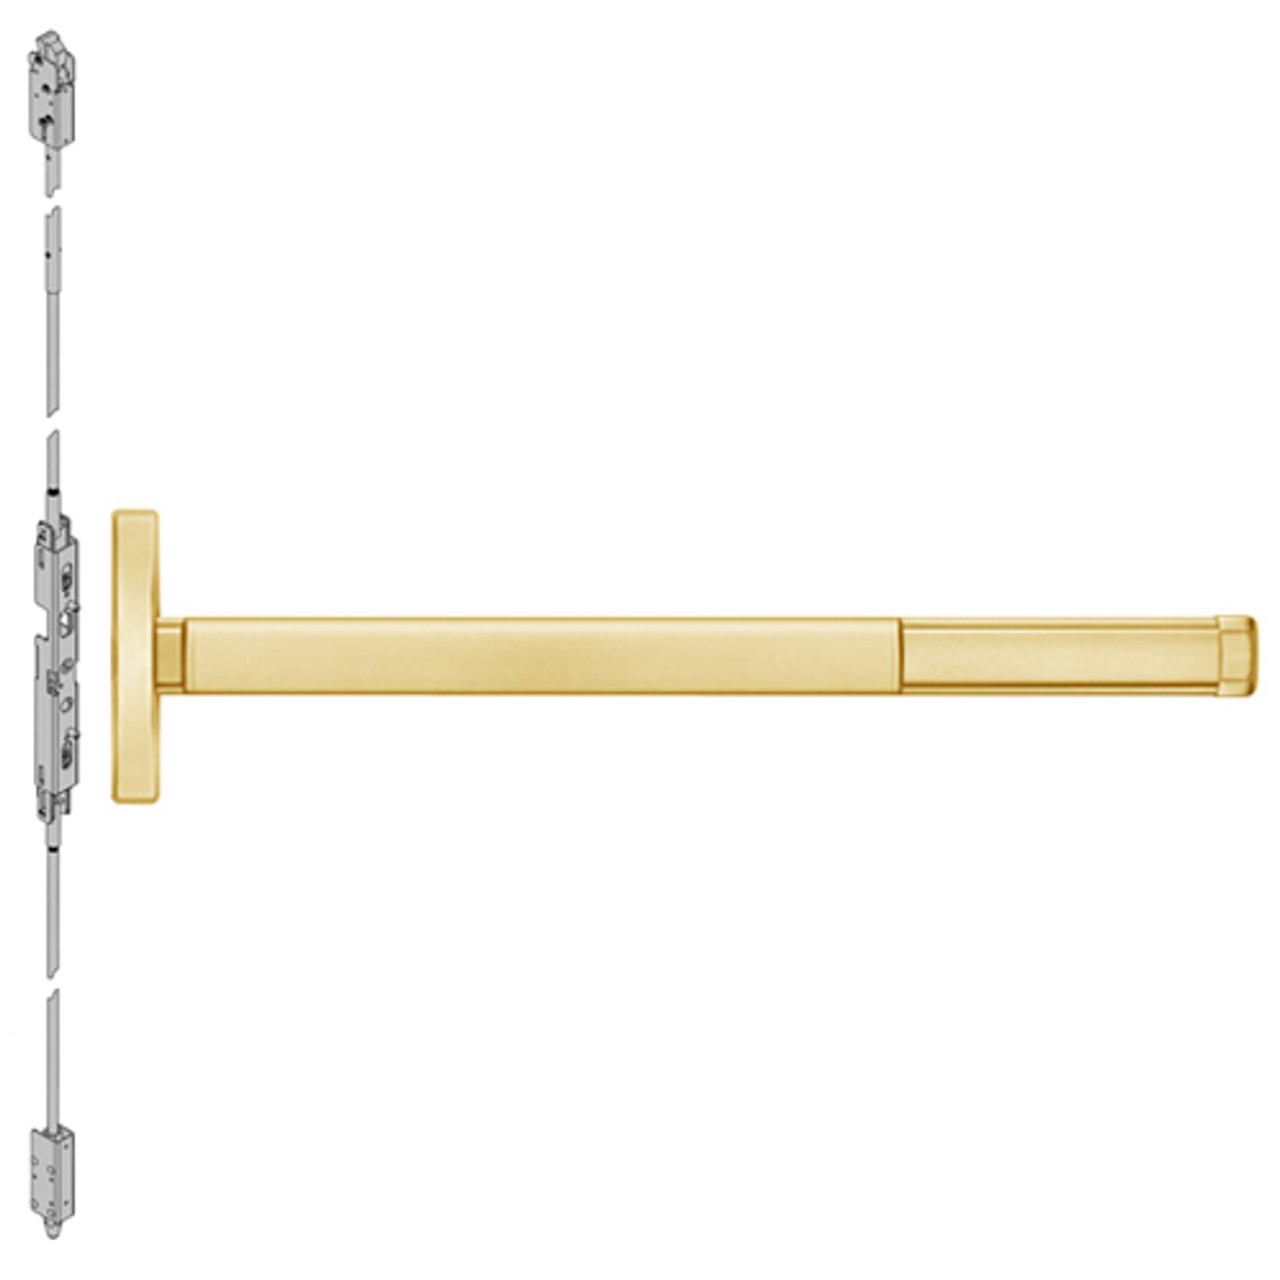 ELR2603LBR-605-36 PHI 2600 Series Concealed Vertical Rod Exit Device with Electric Latch Retraction Prepped for Key Retracts Latchbolt in Bright Brass Finish